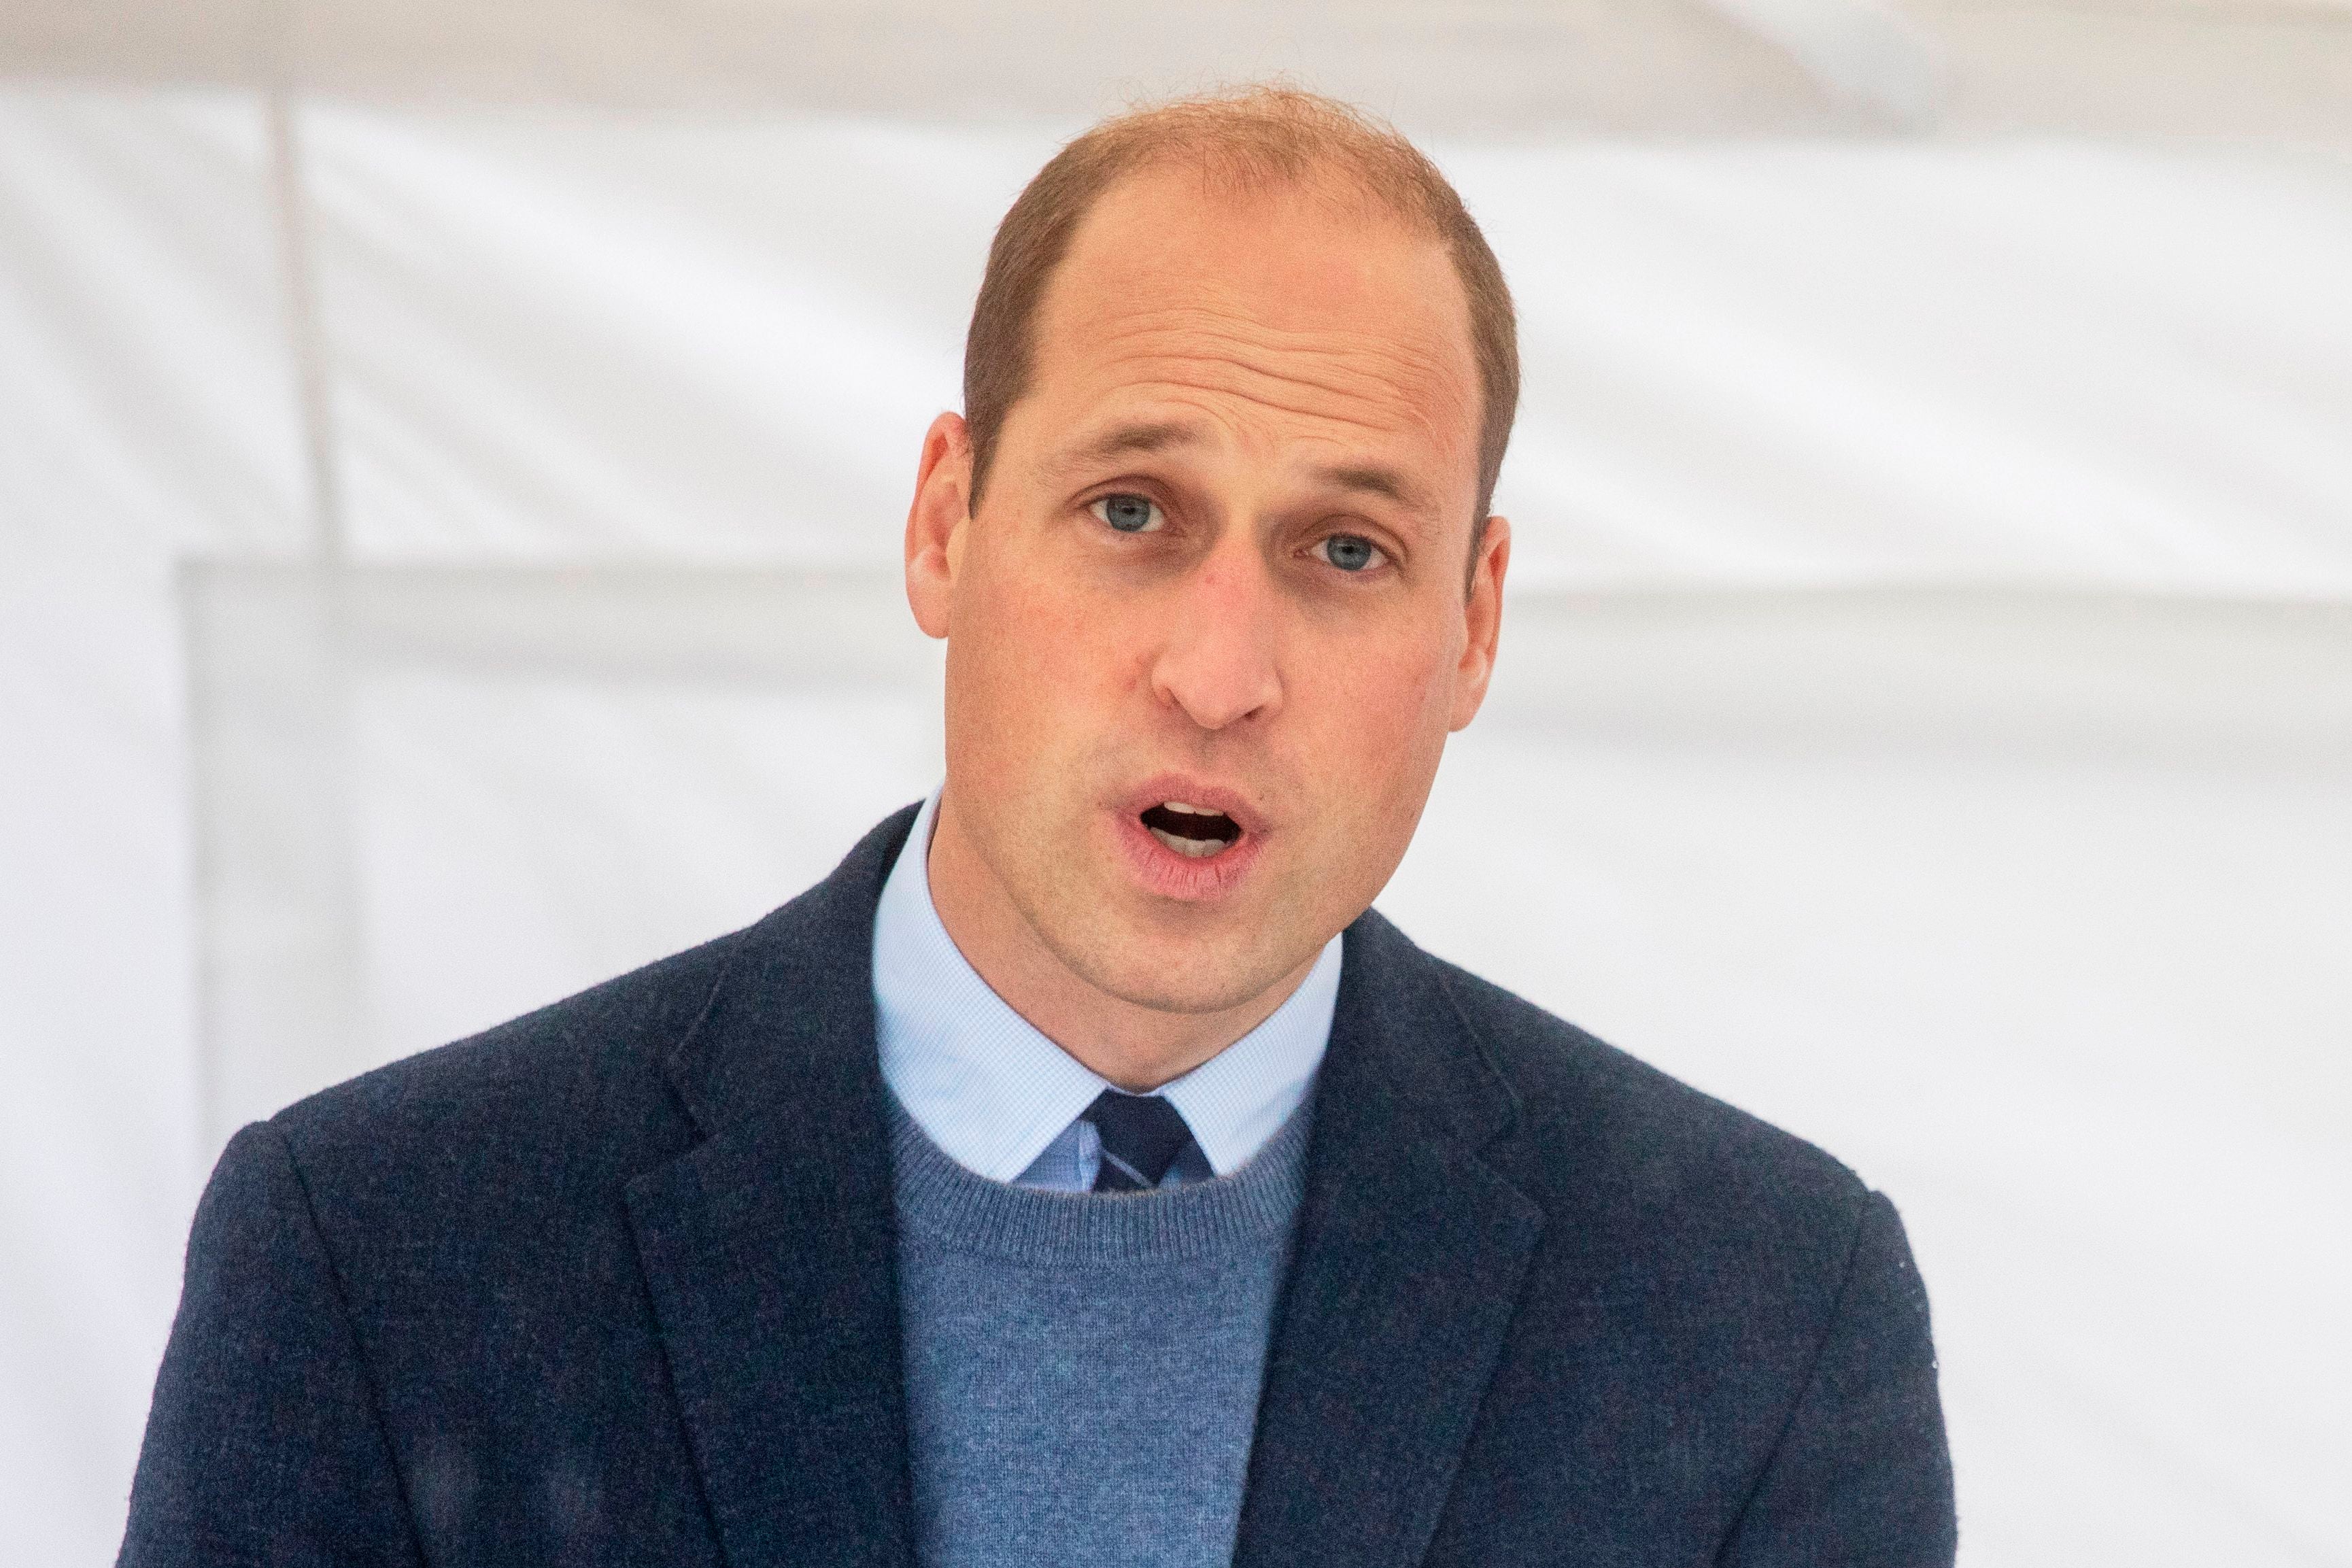 Prince William is second in line to the throne after his father, the Prince of Wales